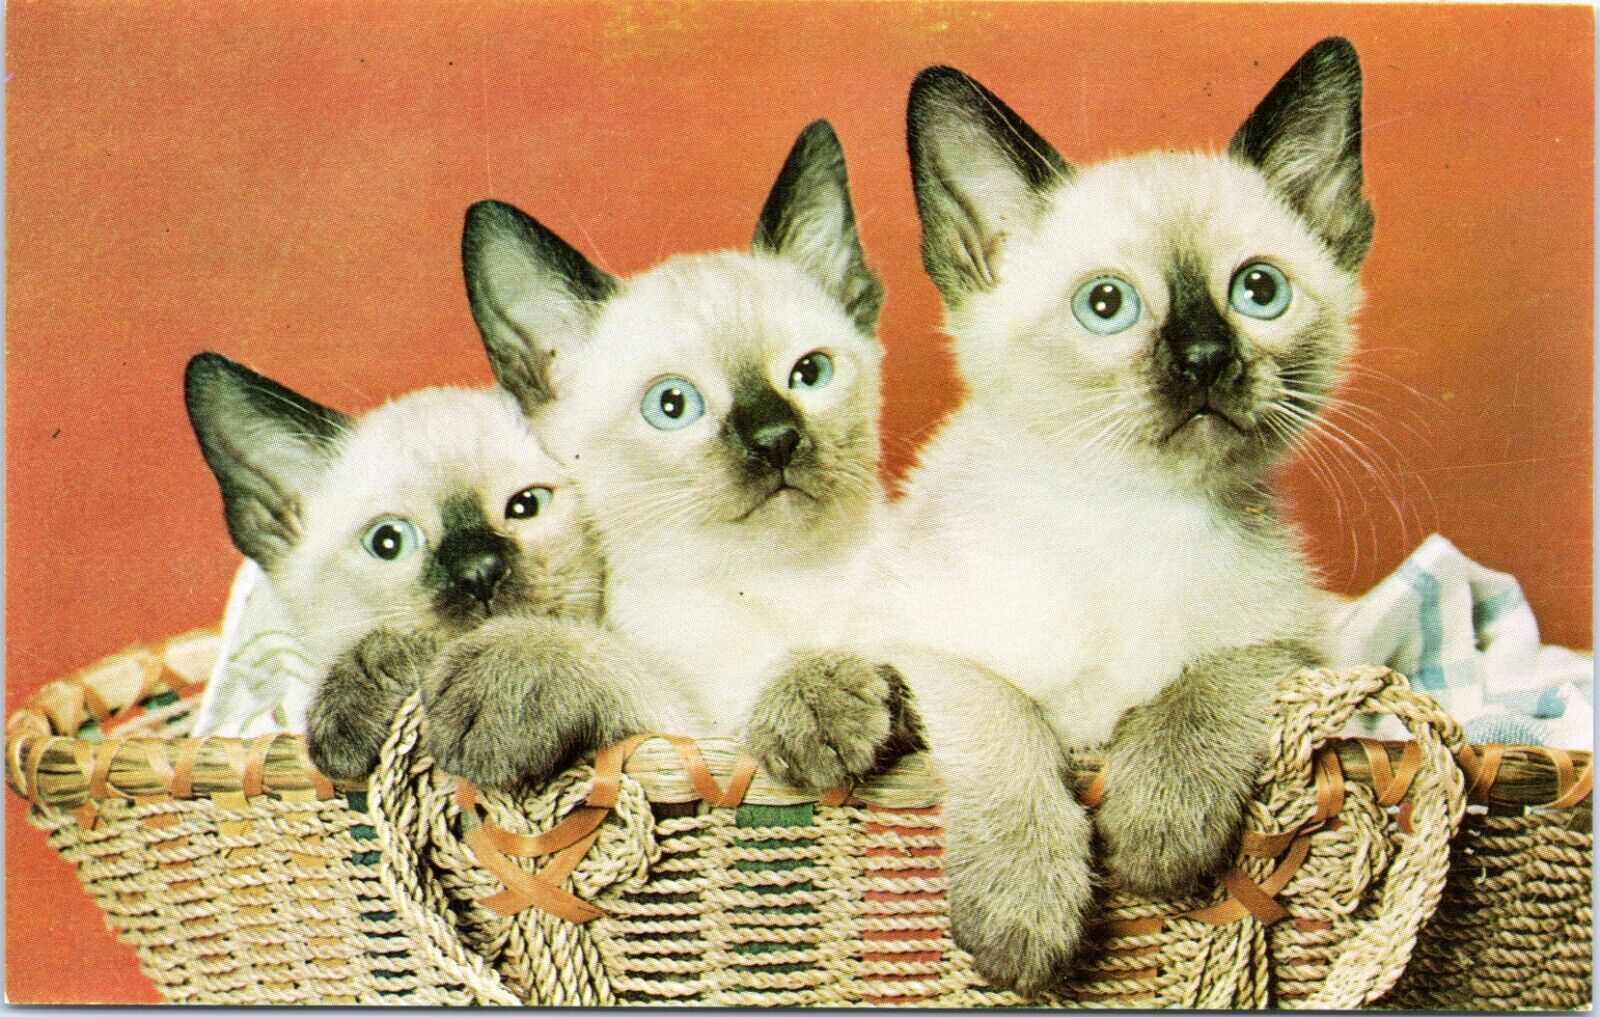 c1950's, three cute kittens in a basket, Vintage Chrome, cats, sweet